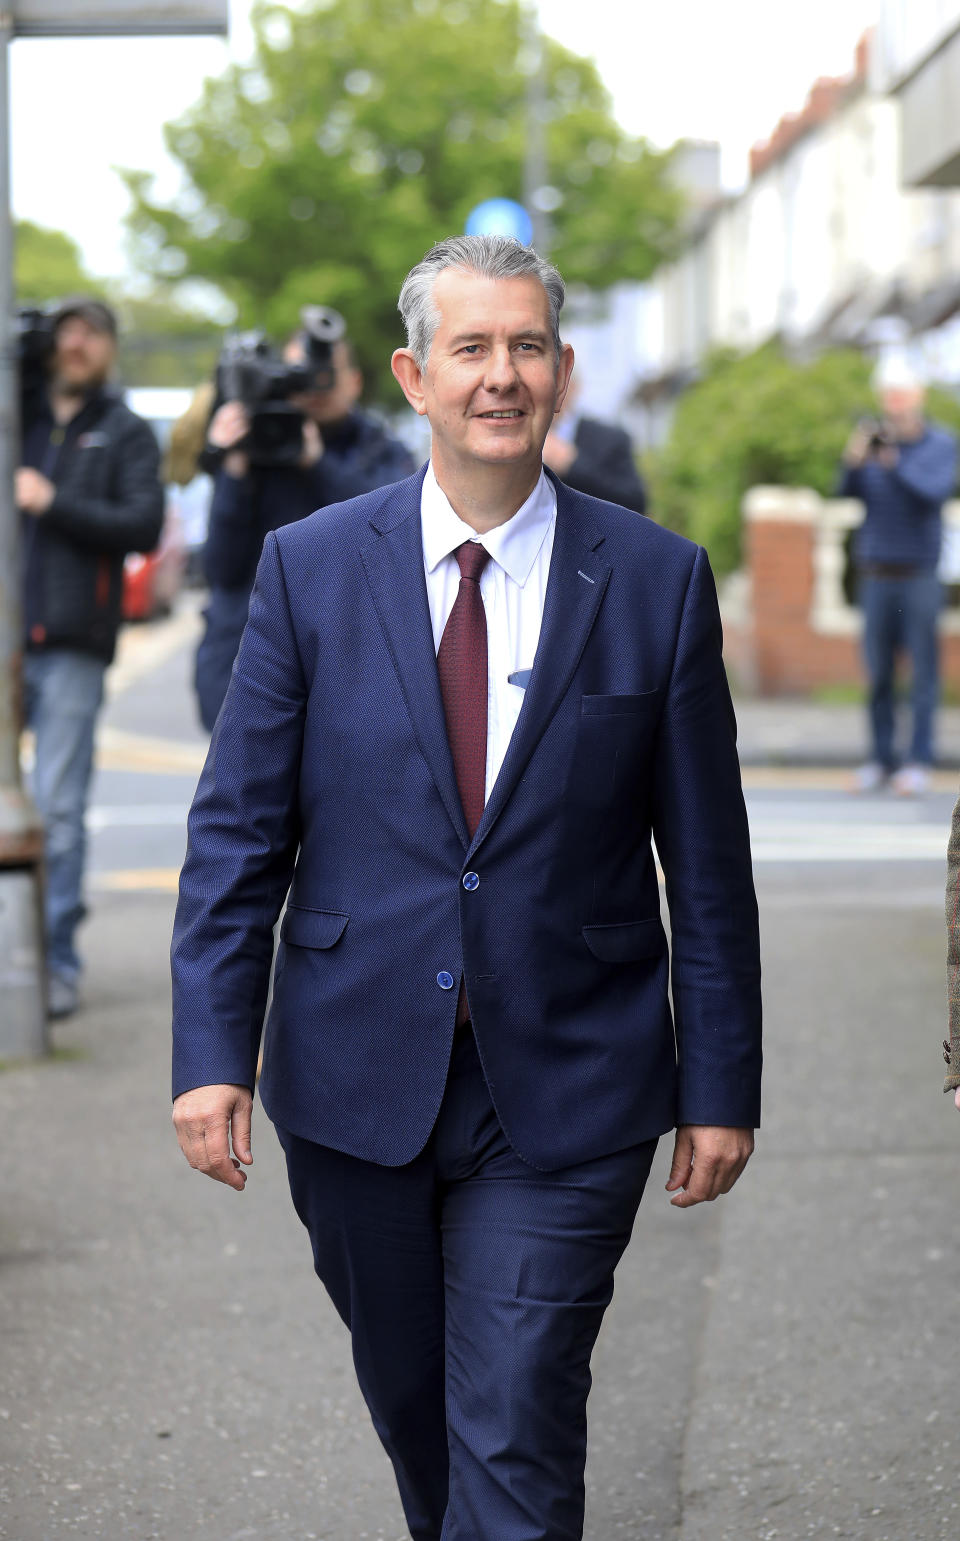 Democratic Unionist Party members Edwin Poots leaves the party headquarters in east Belfast after voting took place to elect a new leader on Friday May 14, 2021. Edwin Poots and Jeffrey Donaldson are running to replace Arlene Foster. (AP Photo/Peter Morrison)